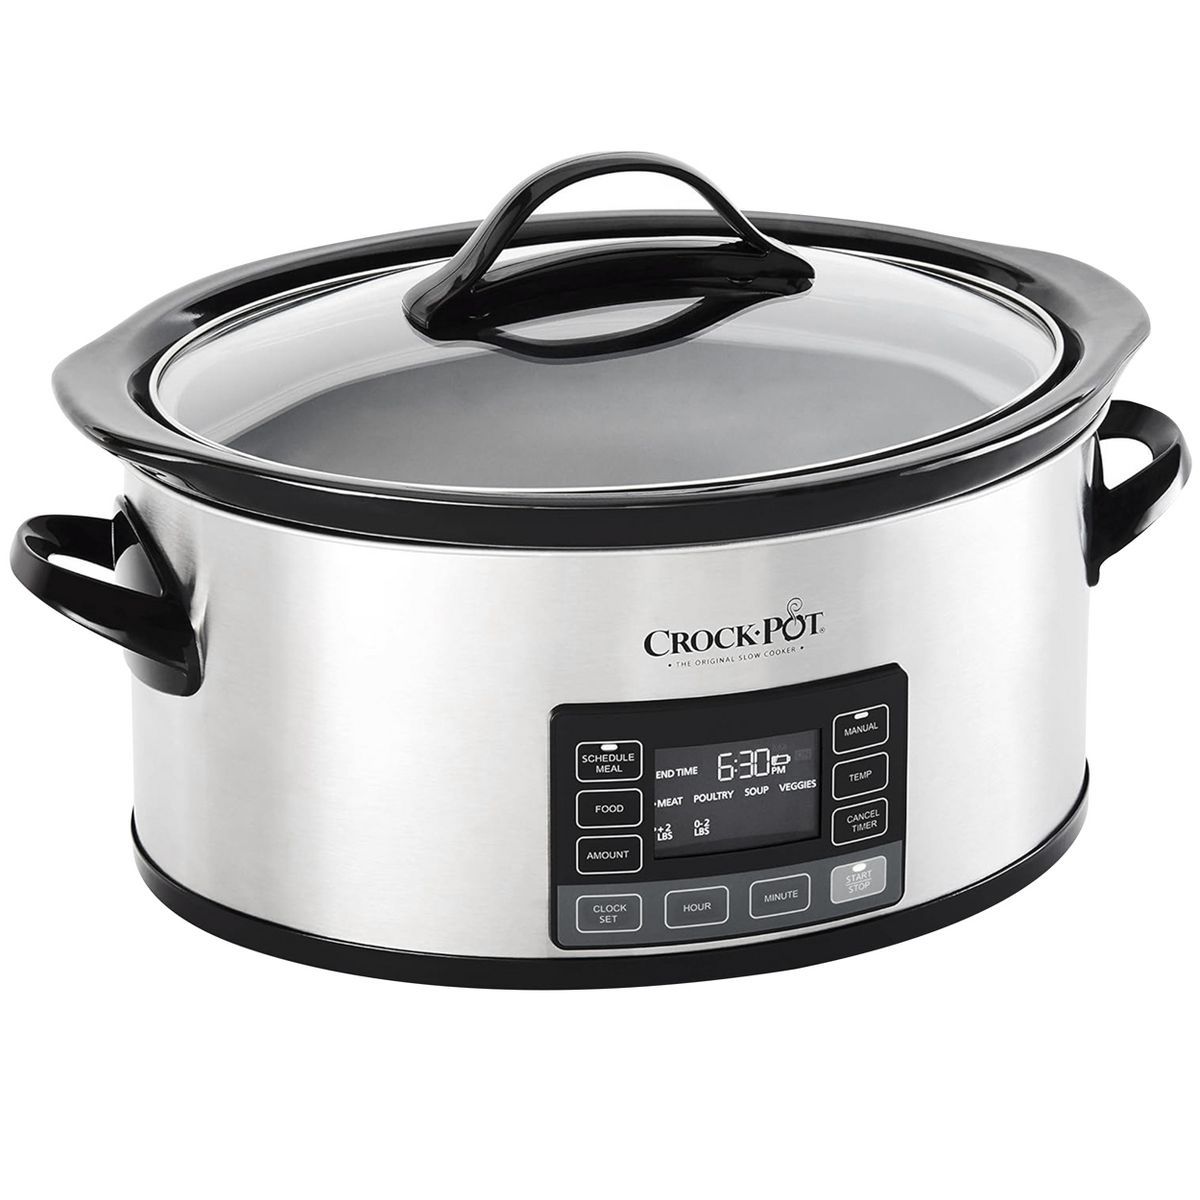 Crock-Pot Programmable 6-Quart Stainless Steel Slow Cooker with MyTime Technology | Target